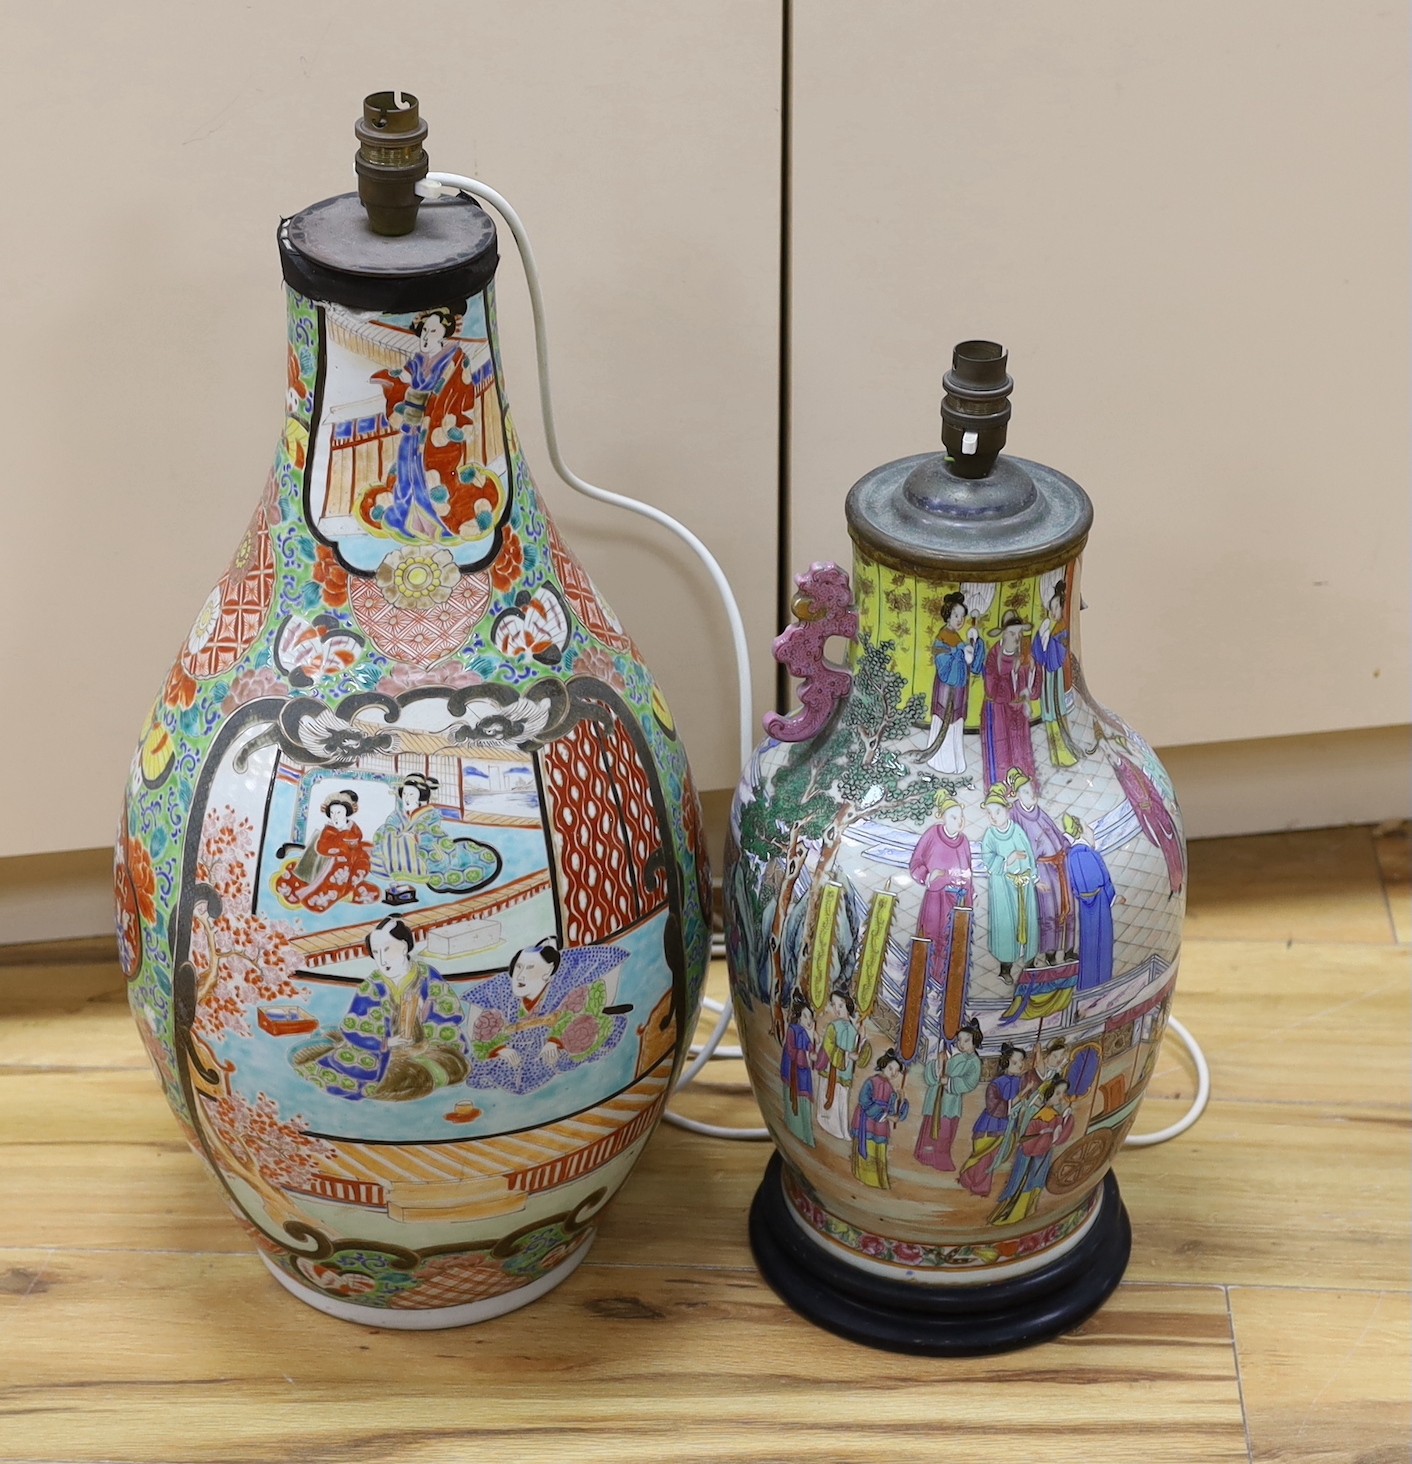 A 19th-century Chinese famille rose vase, and a late 19th century Japanese enamelled porcelain